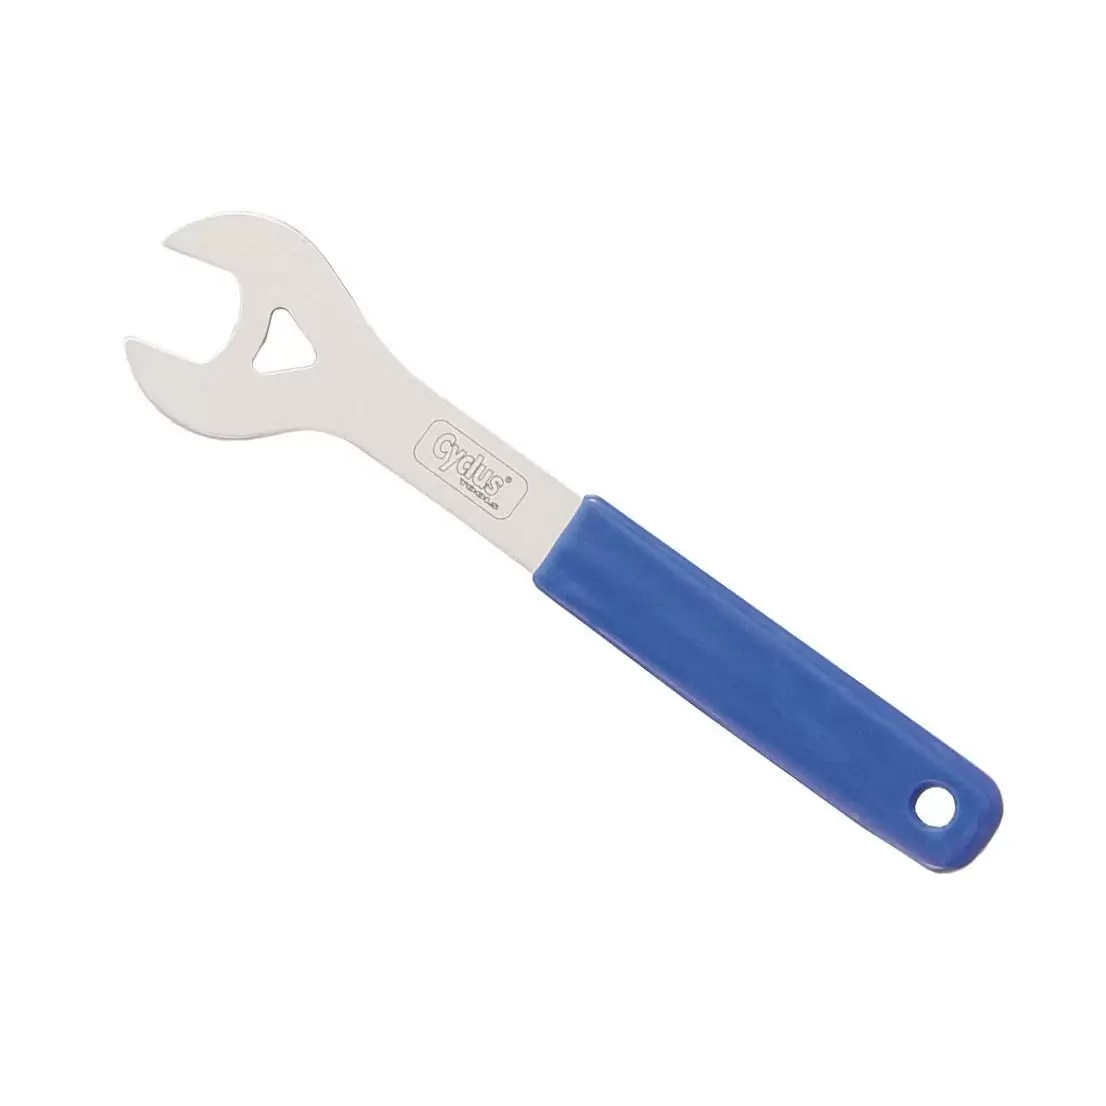 Hub cone wrench 22 mm - image